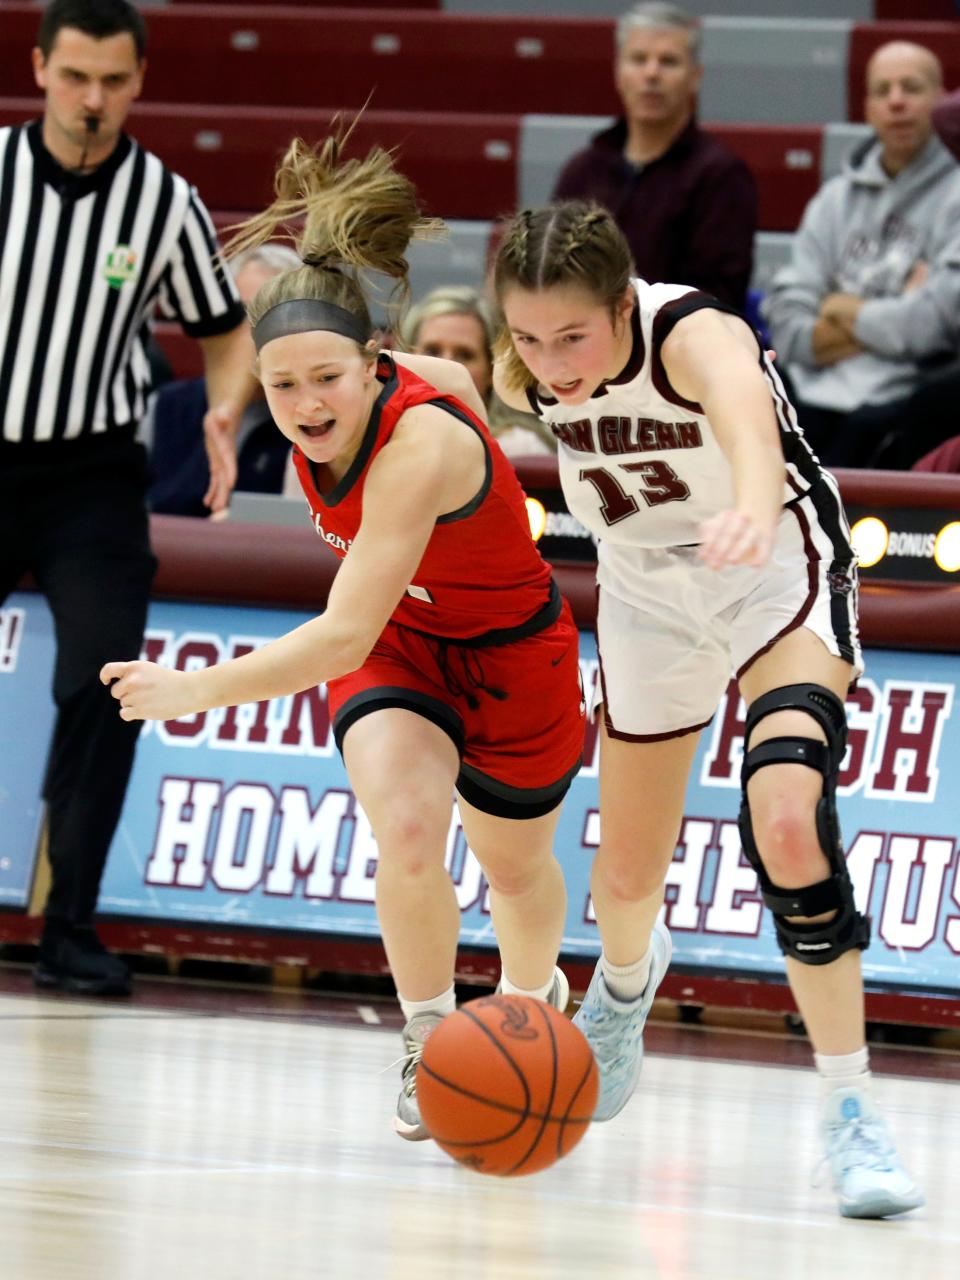 Freshman Mylie Forgrave, left, chases after loose ball with Riley Zamensky during Sheridan's 58-55 win against host John Glenn on Saturday in New Concord. The Generals overcame a nine-point second-half deficit to stay unbeaten.